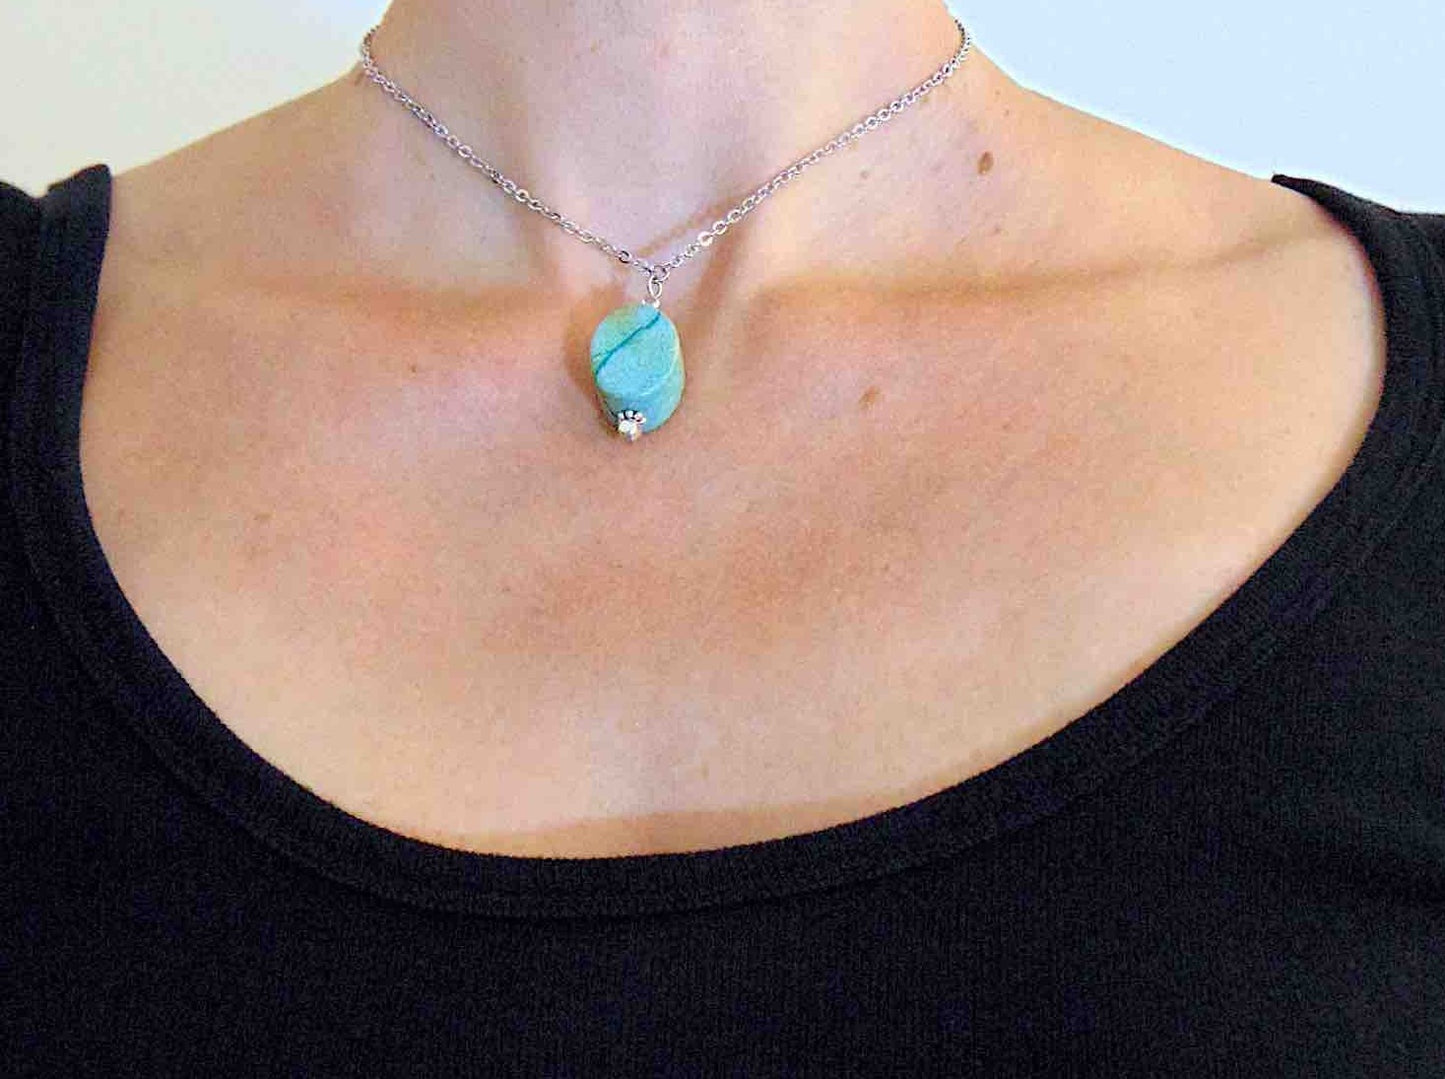 15-inch necklace with oval blue-green marbled chrysocolla stone, stainless steel chain chain